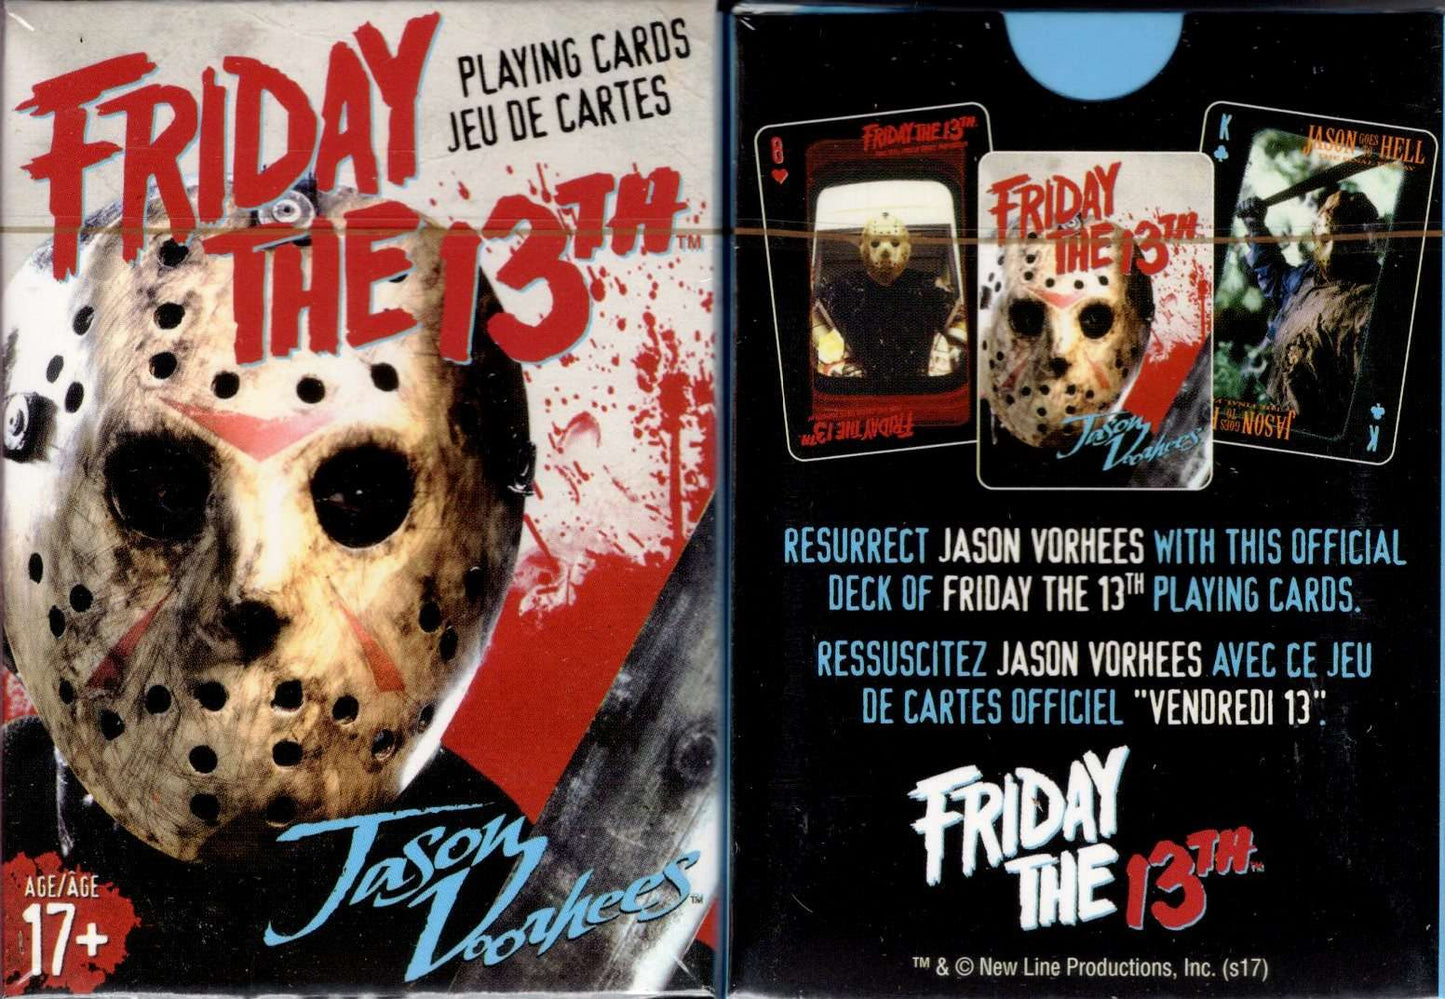 AQUARIUS Friday the 13th Playing Cards - Friday the 13th Themed Deck of  Cards for Your Favorite Card Games - Officially Licensed Friday the 13th